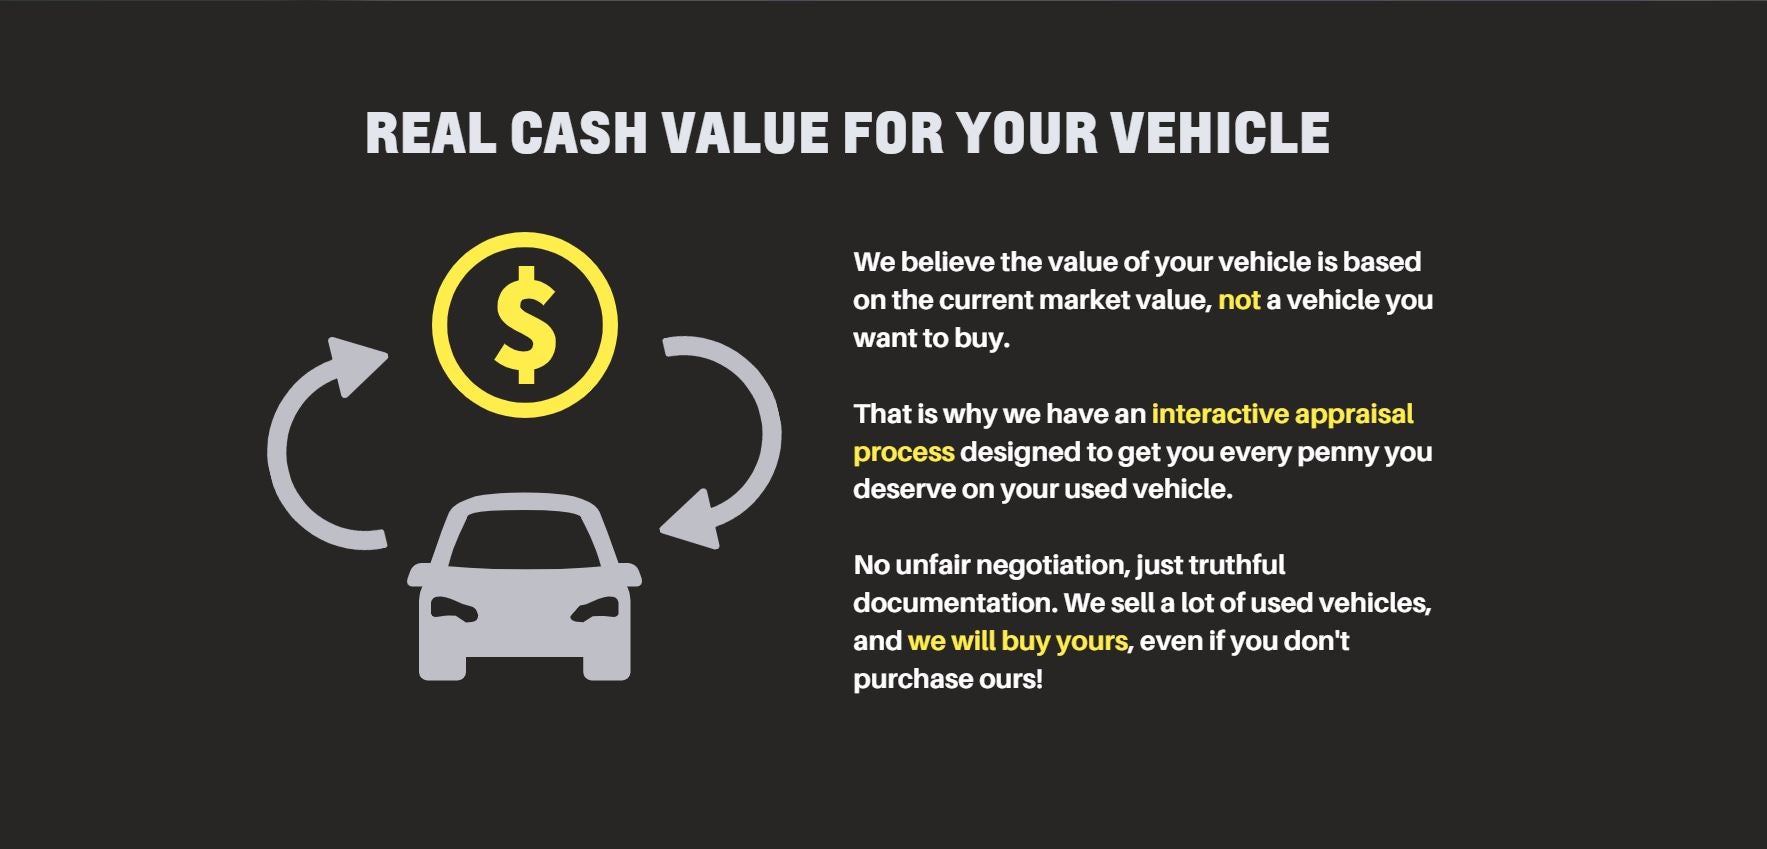 Real Cash value for your vehicle Sheboygan Chevrolet Buick GMC in Sheboygan WI